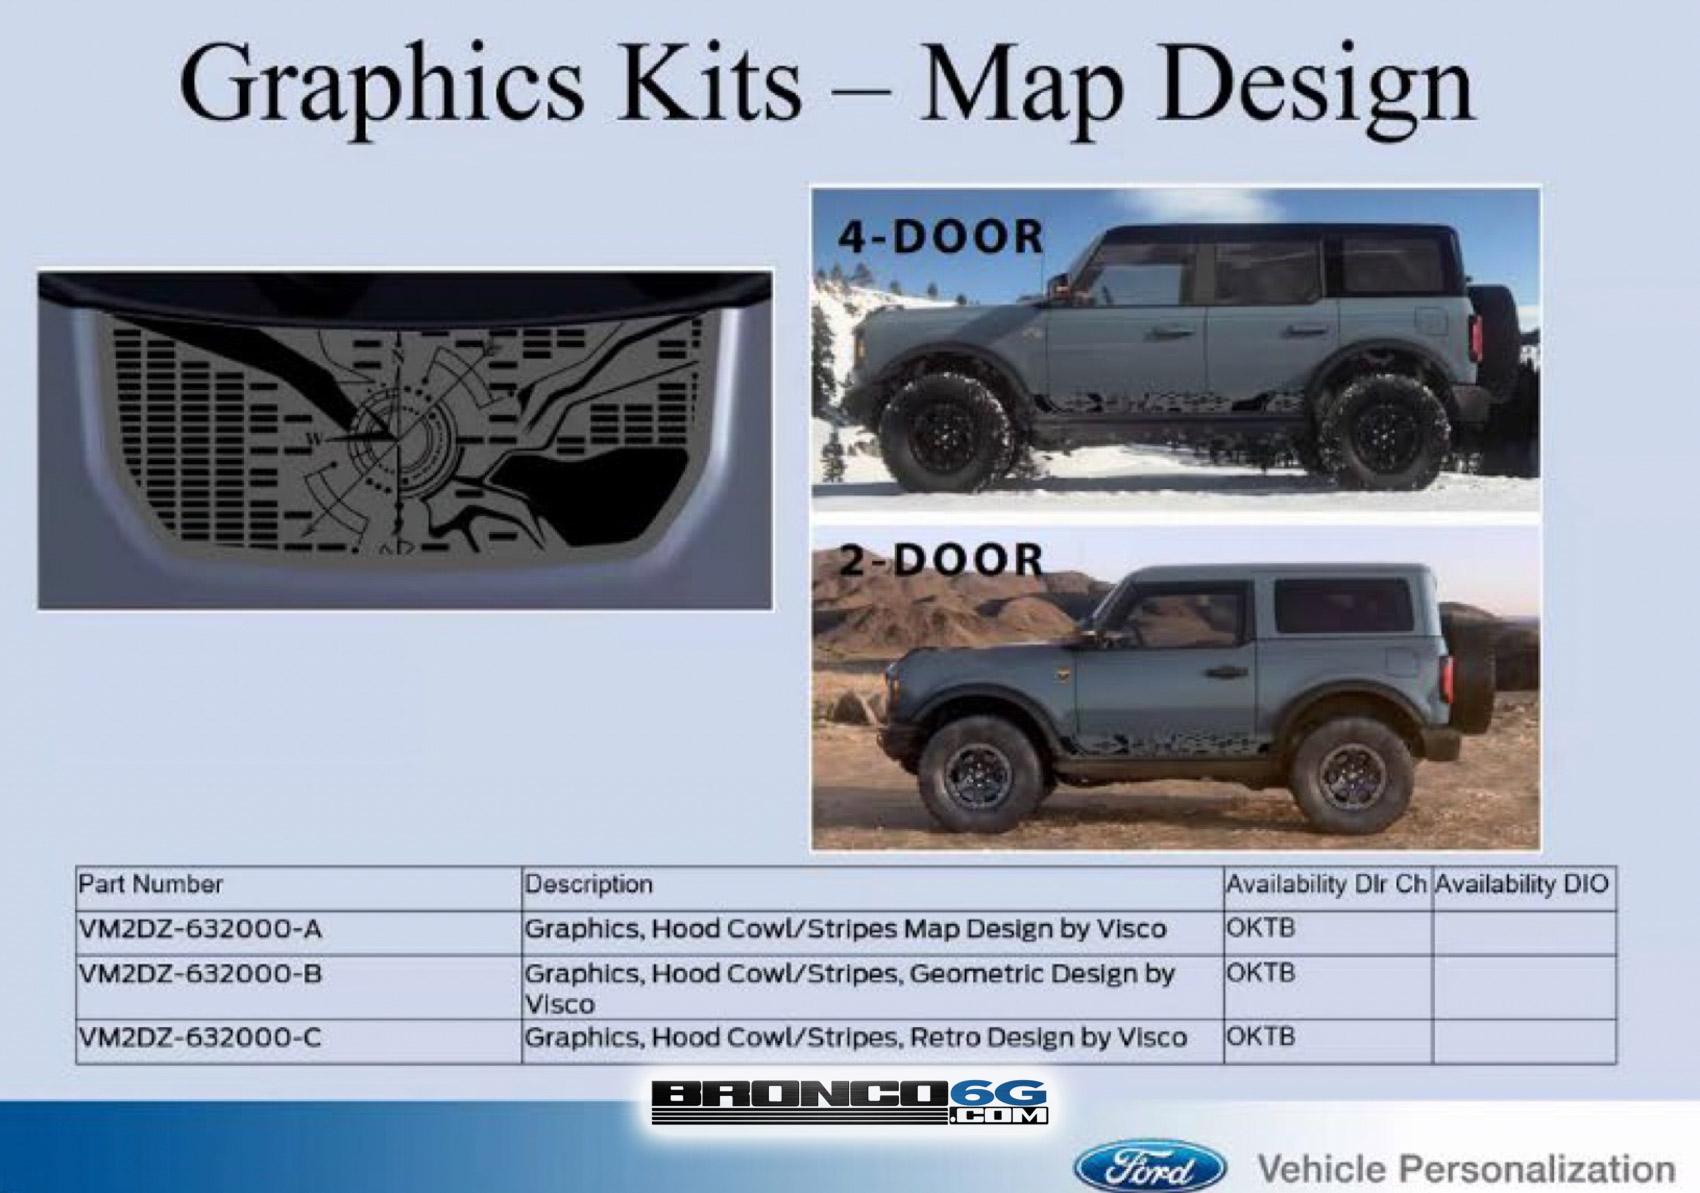 Ford Bronco ⚙️ 2021 BRONCO ACCESSORIES PICTURES! Ford Performance Parts Catalog + Availability Schedule ? ovce3zt7j94wc8cho1f8mls9bix6d52xri6w18vi&rid=giphy